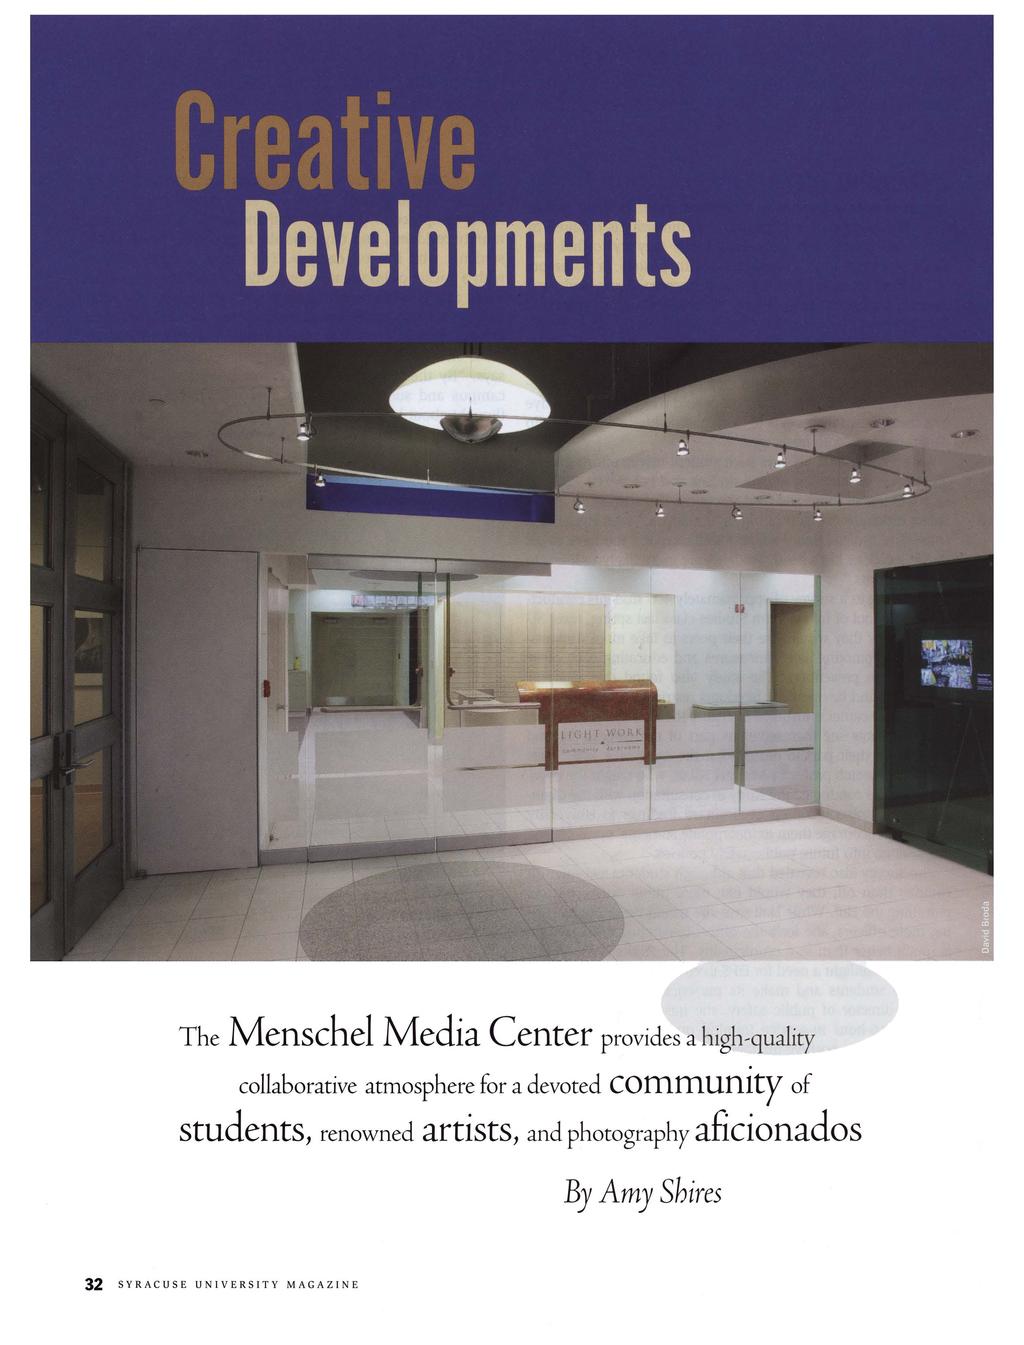 Shires: Creative Development The Menschel Media Center provides a high ~quality collaborative atmosphere for a devoted community of